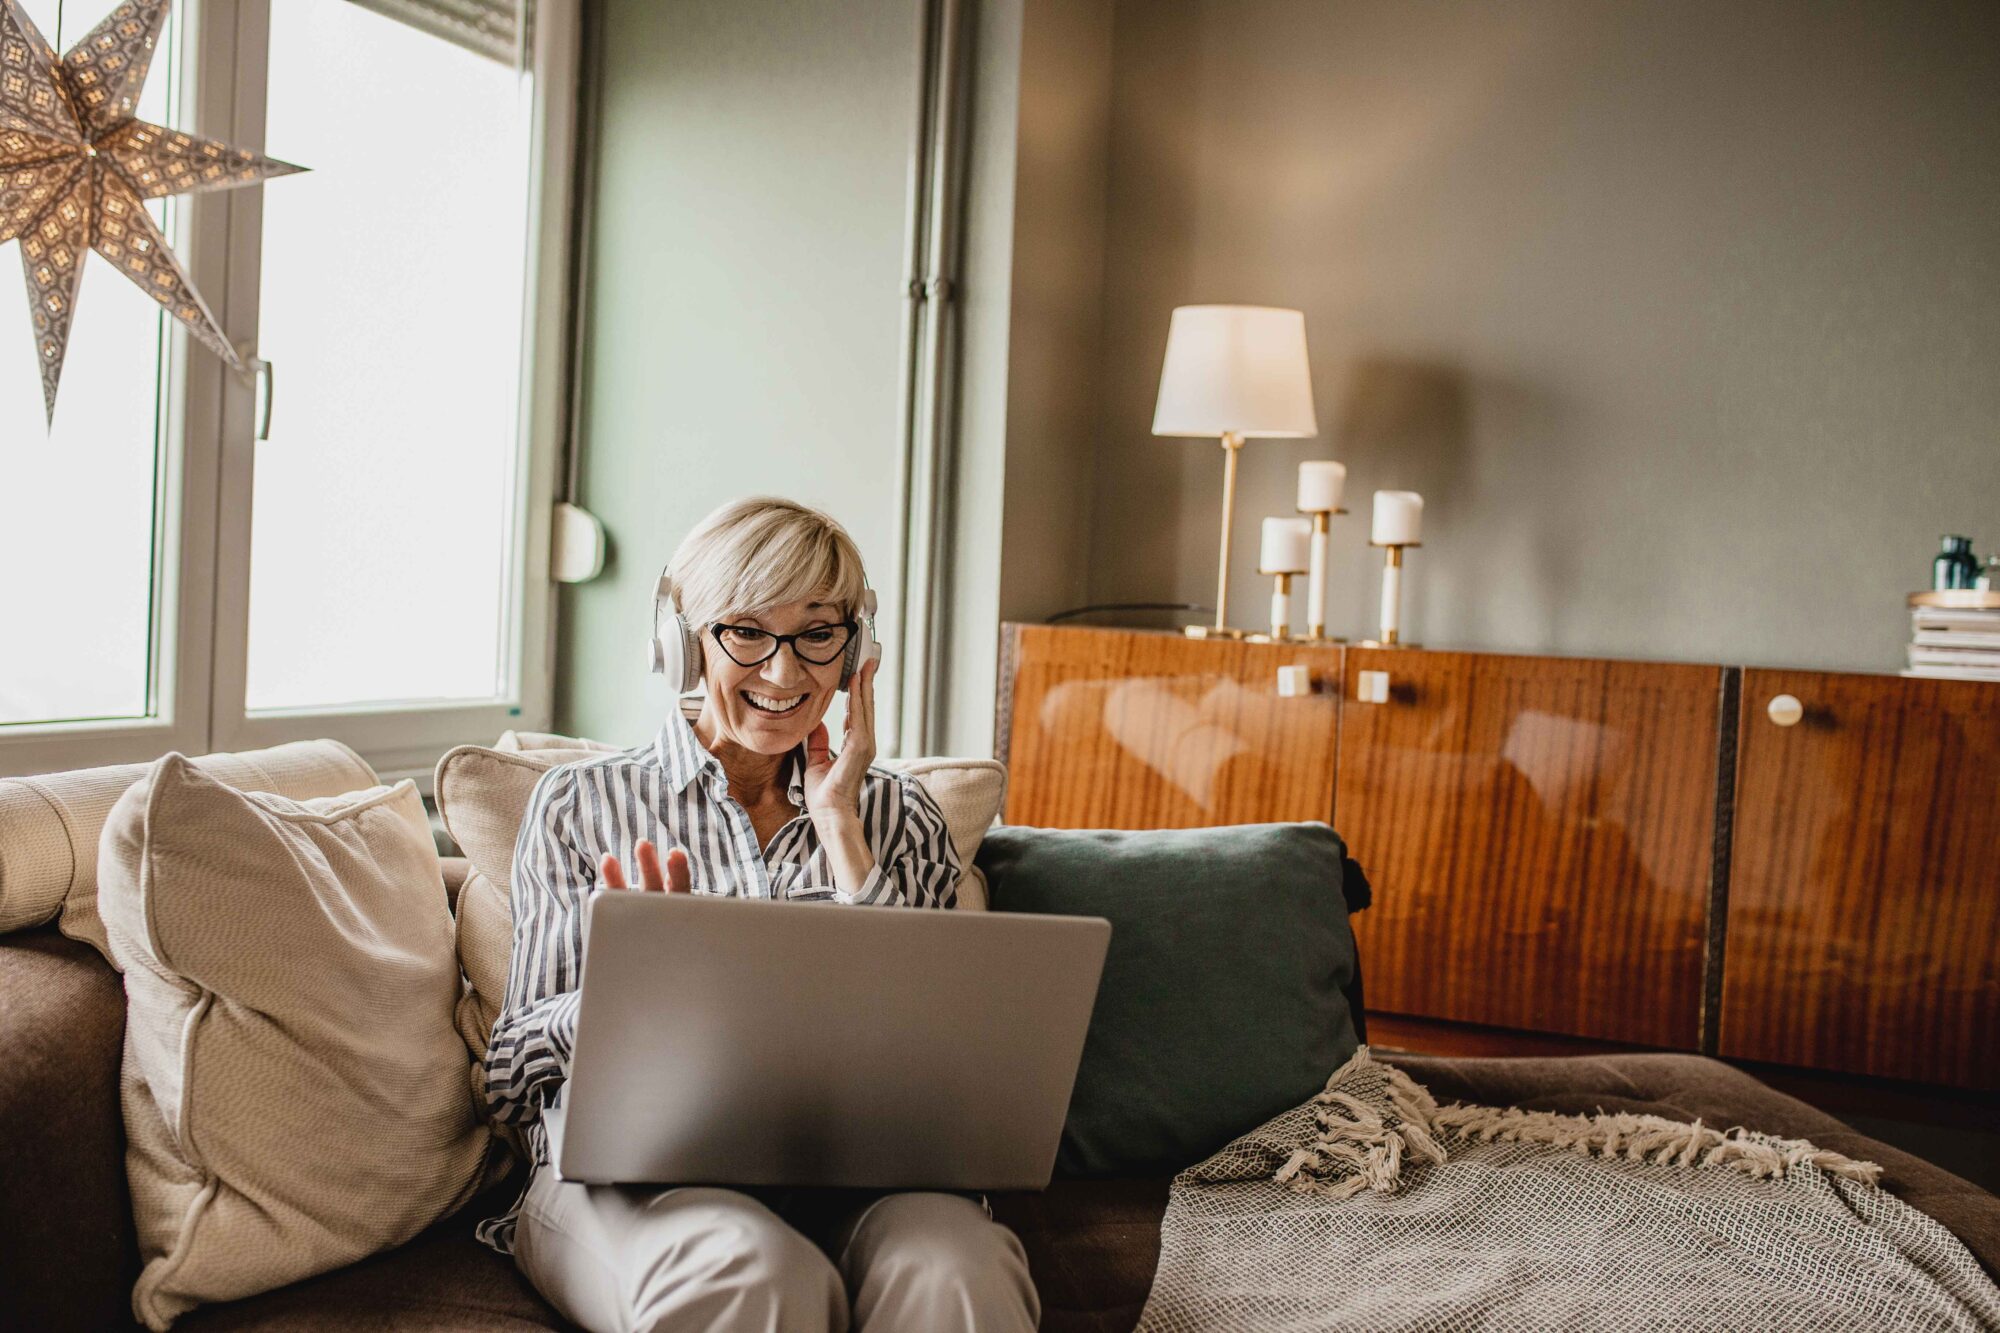 Mature woman is in her modern apartment using a laptop